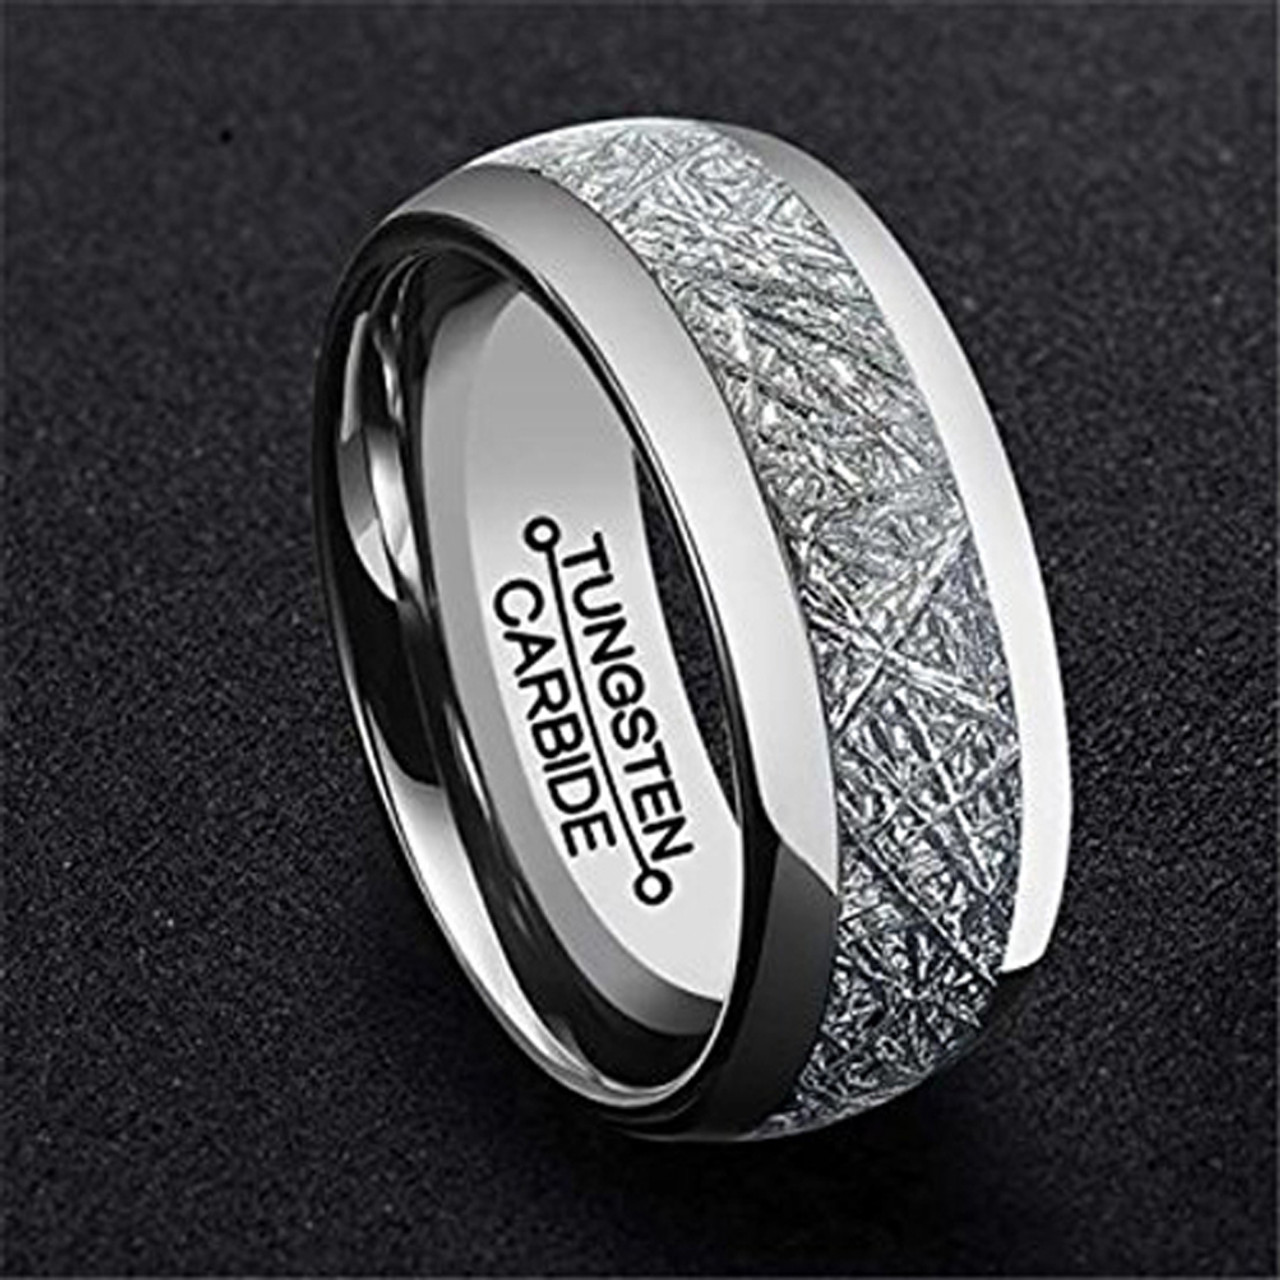 Women's or Men's Tungsten Wedding Band (8mm). Silver Tone Ring with Inspired Meteorite. Domed Top Tungsten Carbide Comfort Fit.